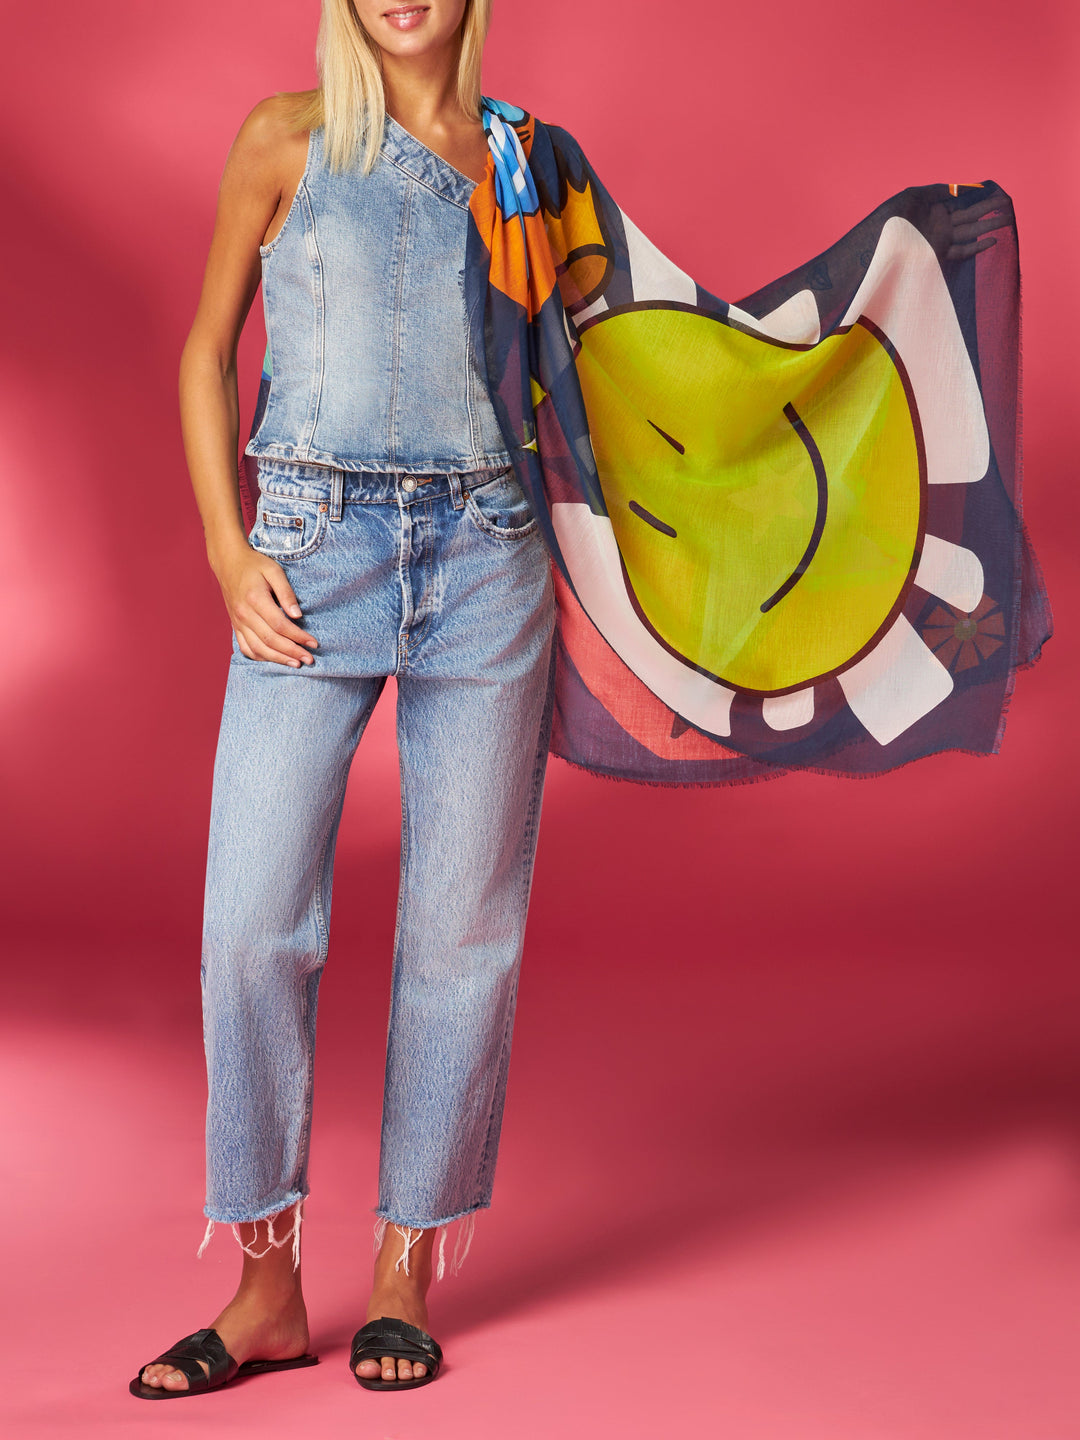 Blonde woman in denim outfit with colorful scarf holds corner of smiling face illustration on a pink background